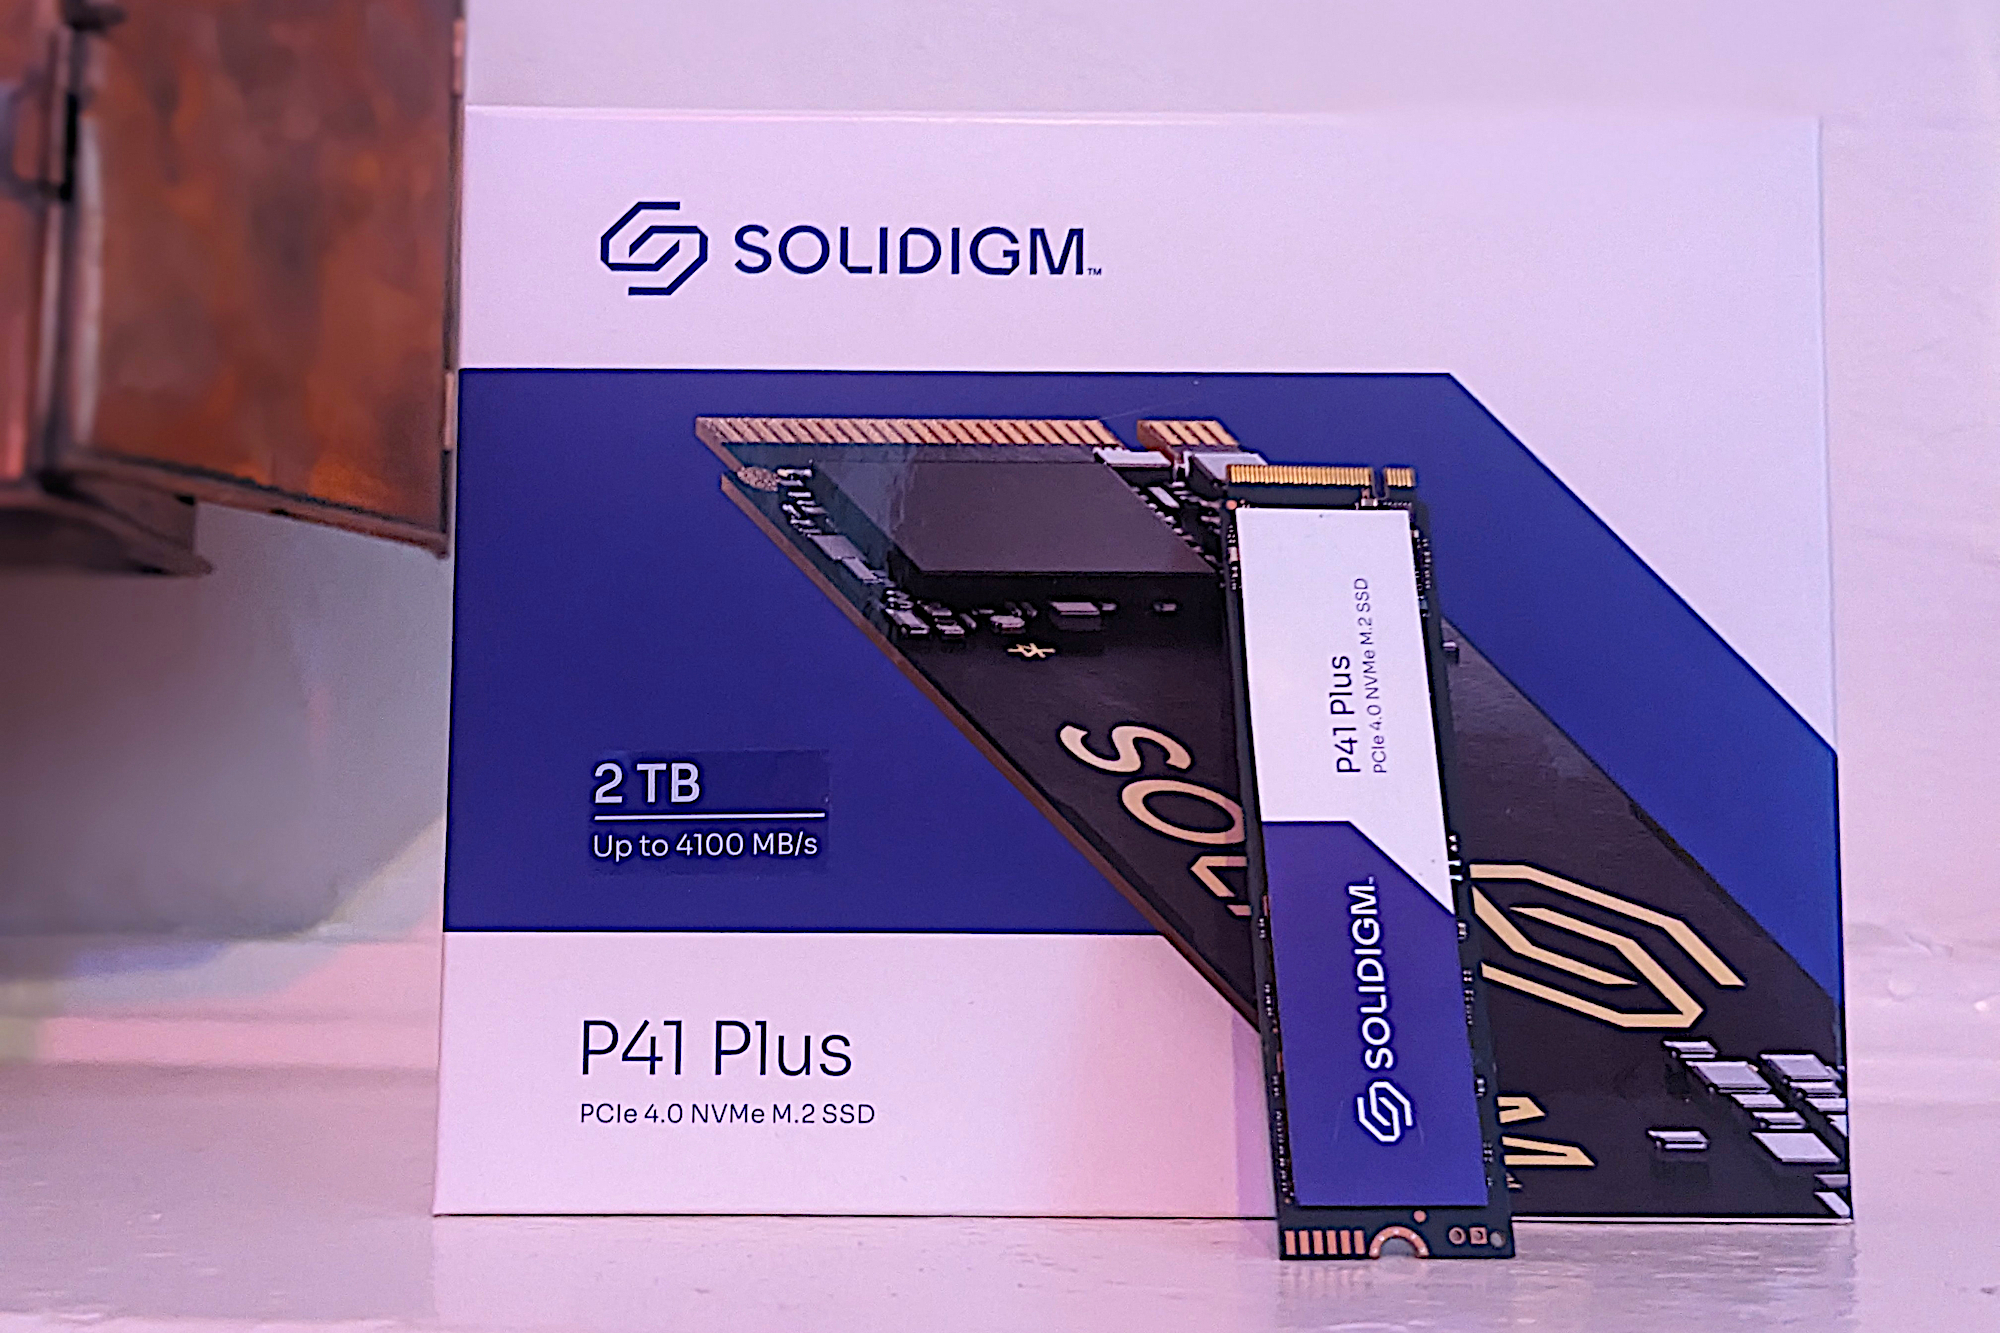 Solidigm P41 Plus  - Best budget PCIe 4.0 SSD runner-up<h2 data-p_name="Solidigm P41 Plus NVMe SSD" class="product-chart-item__title-wrapper--title product-chart-title " id="solidigm-p41-plus-ssd-best-budget-pcie-4-0-ssd"></h2>